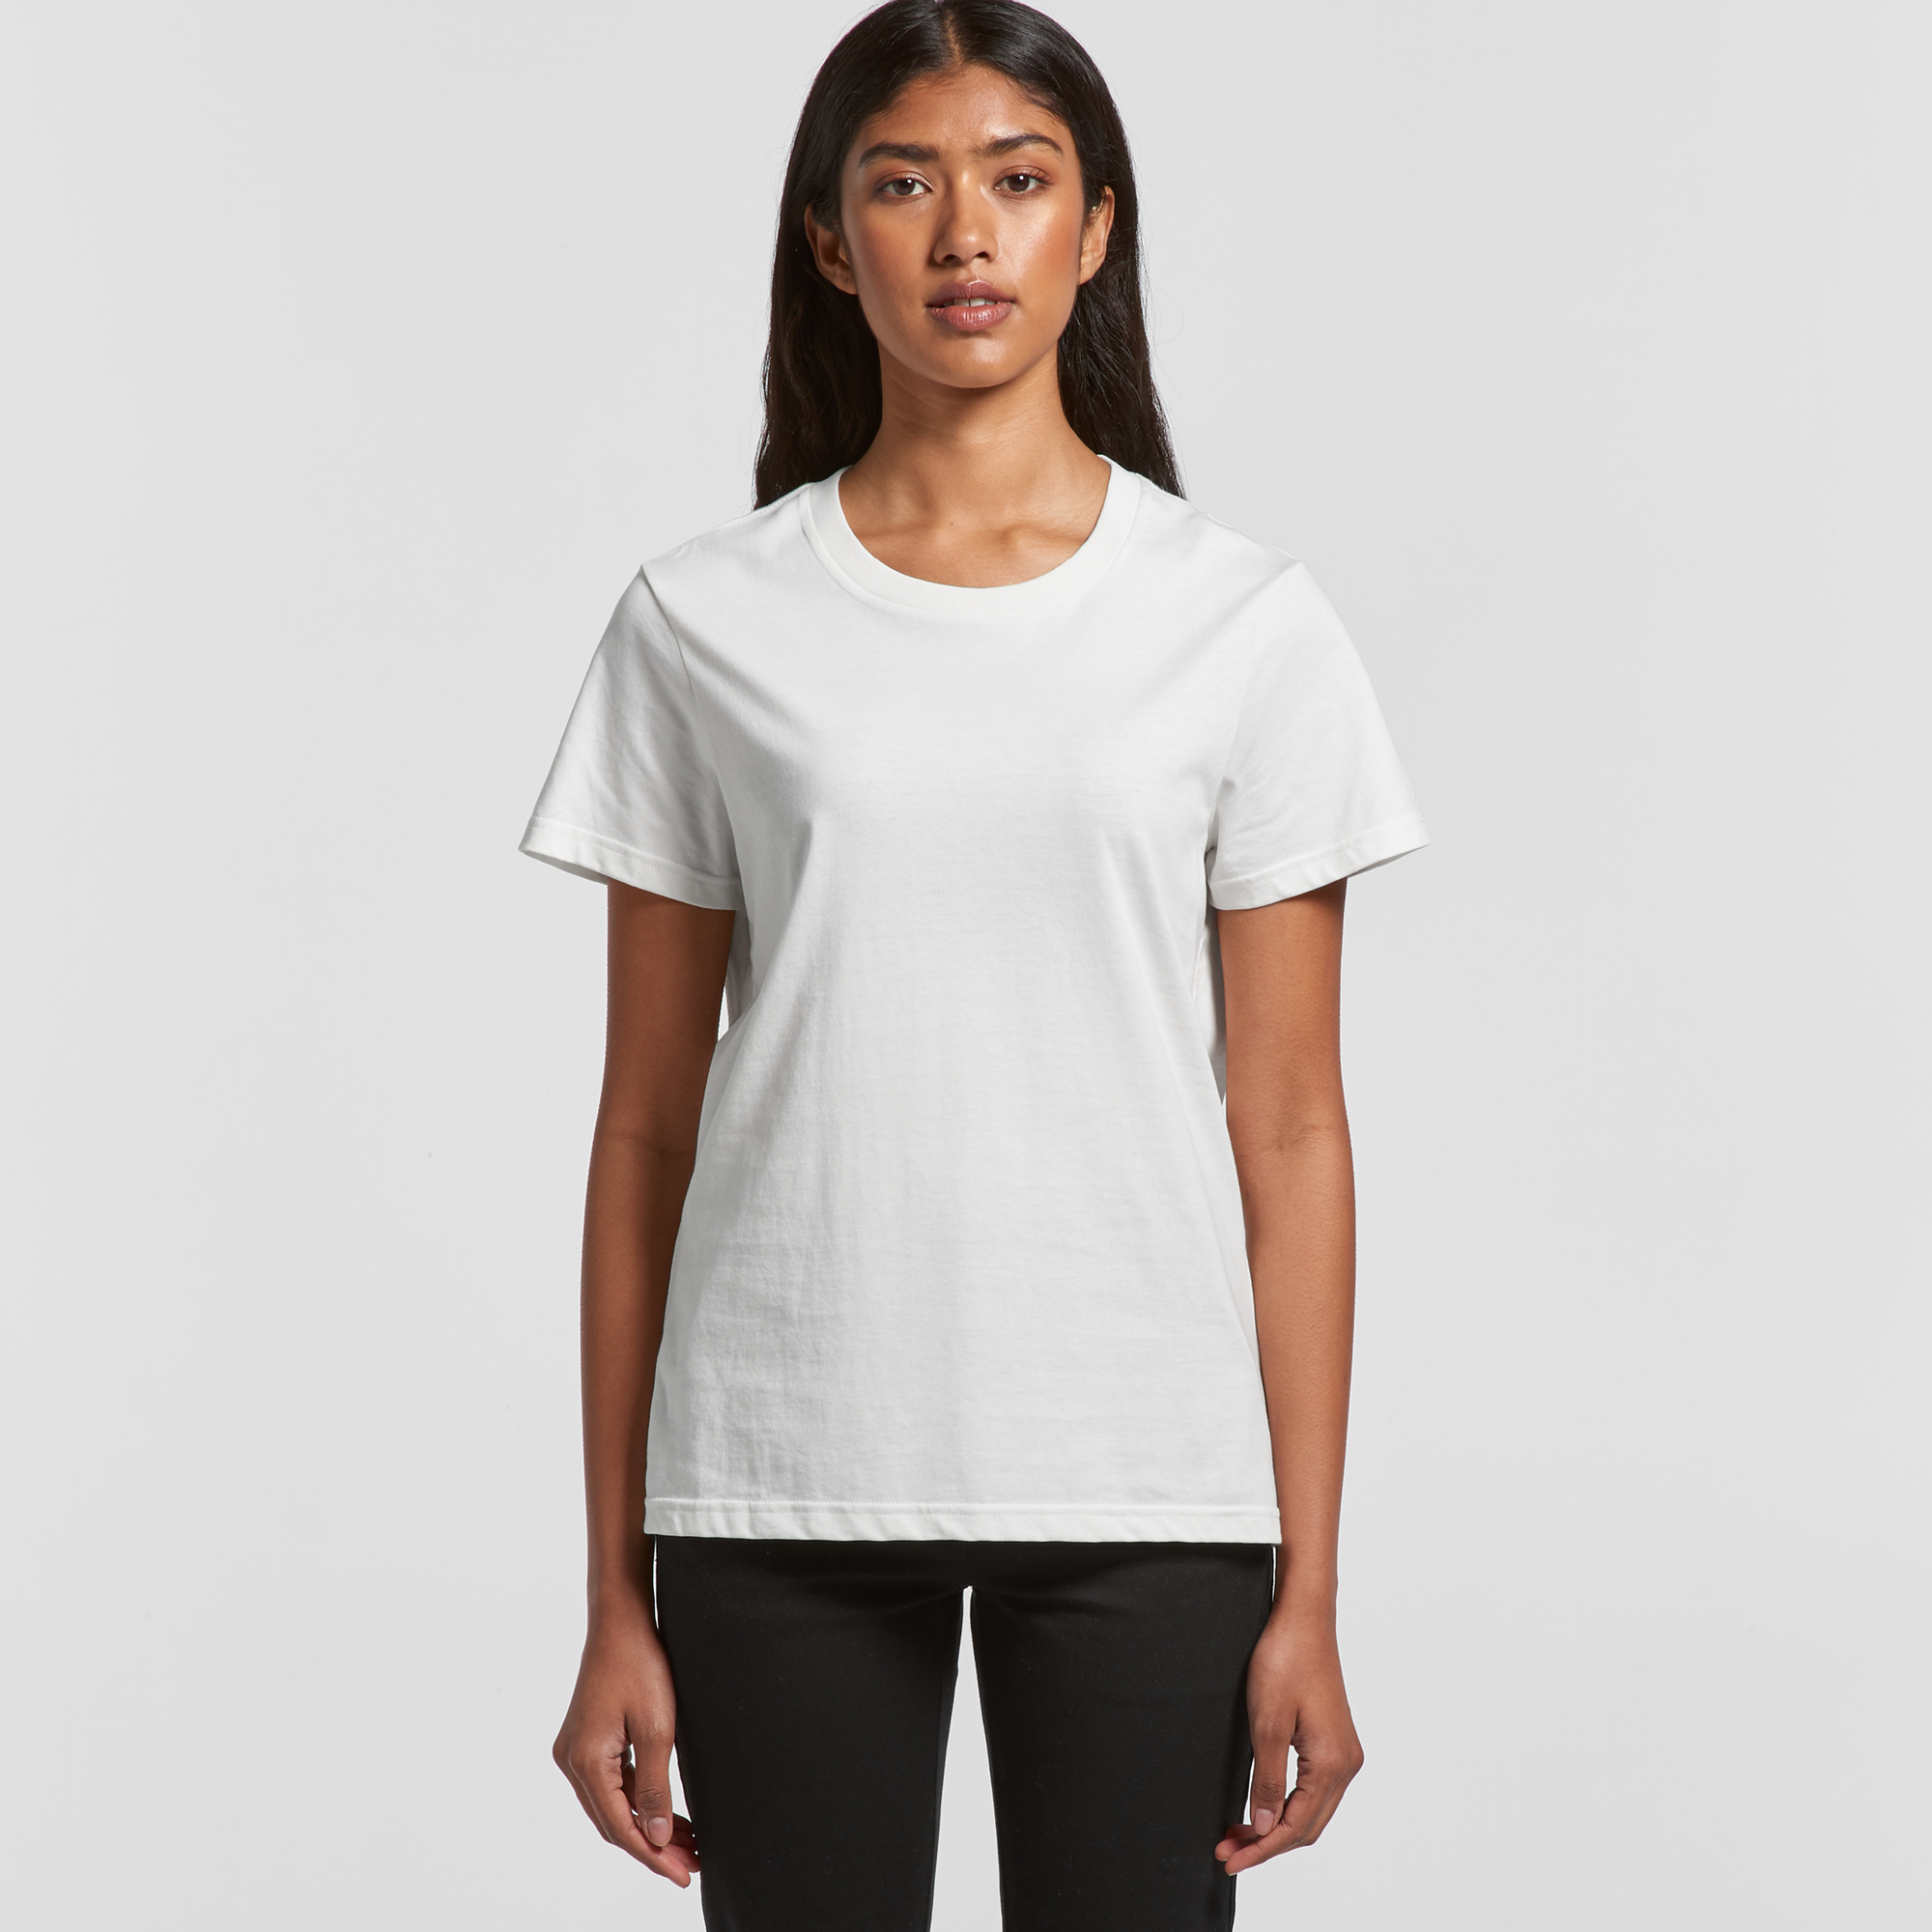 Women's Basic Tee | Branded Basic Tee | Printed Basic Tee NZ | AS Colour | Withers & Co